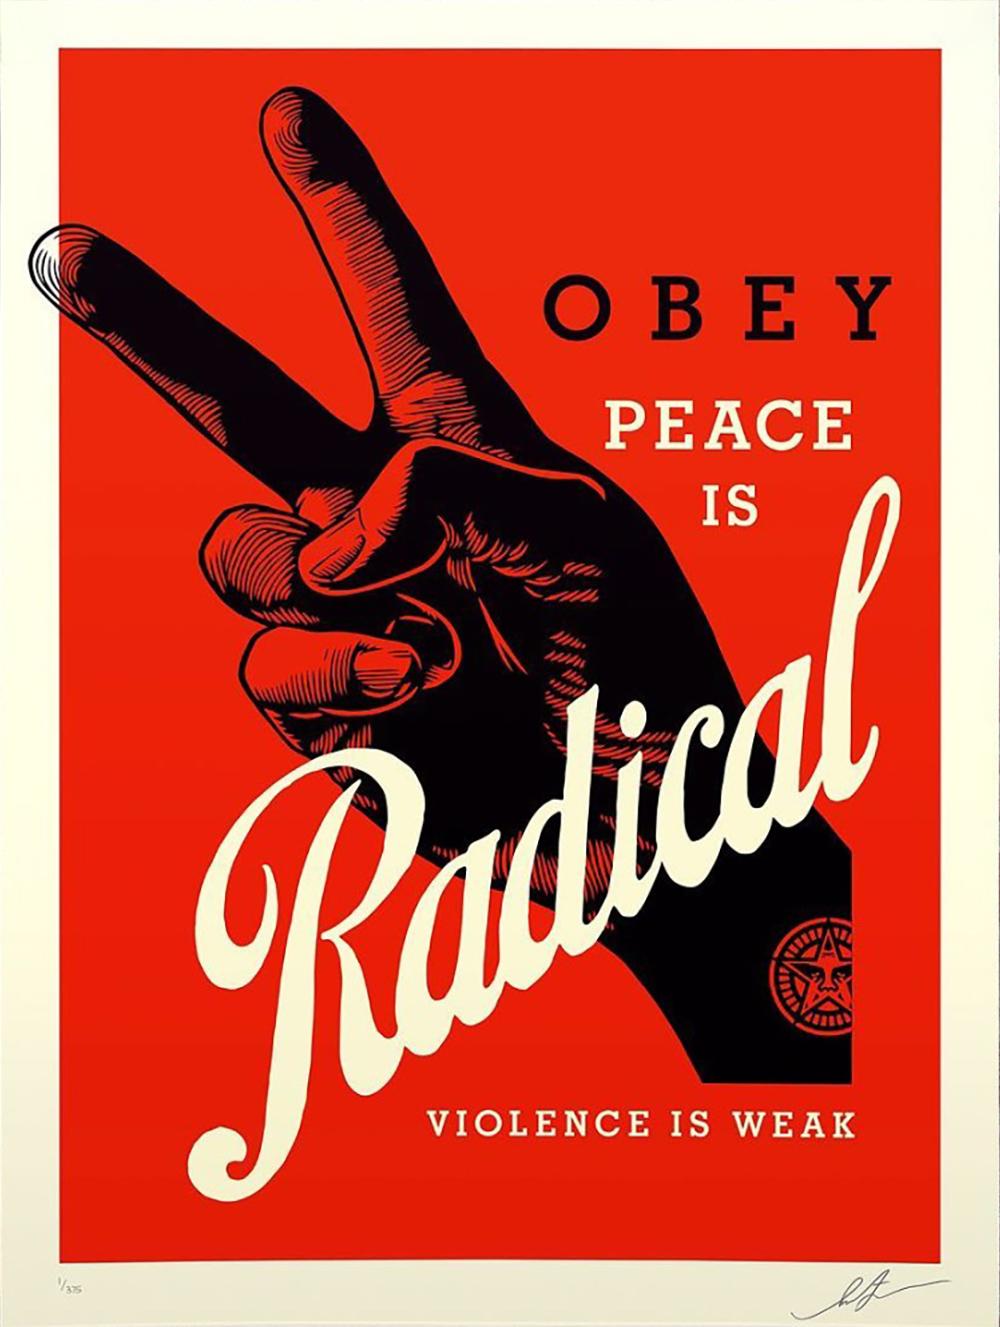 Shepard Fairey - Obey Giant - Radical Peace - Red Edition -Urban Street Art 